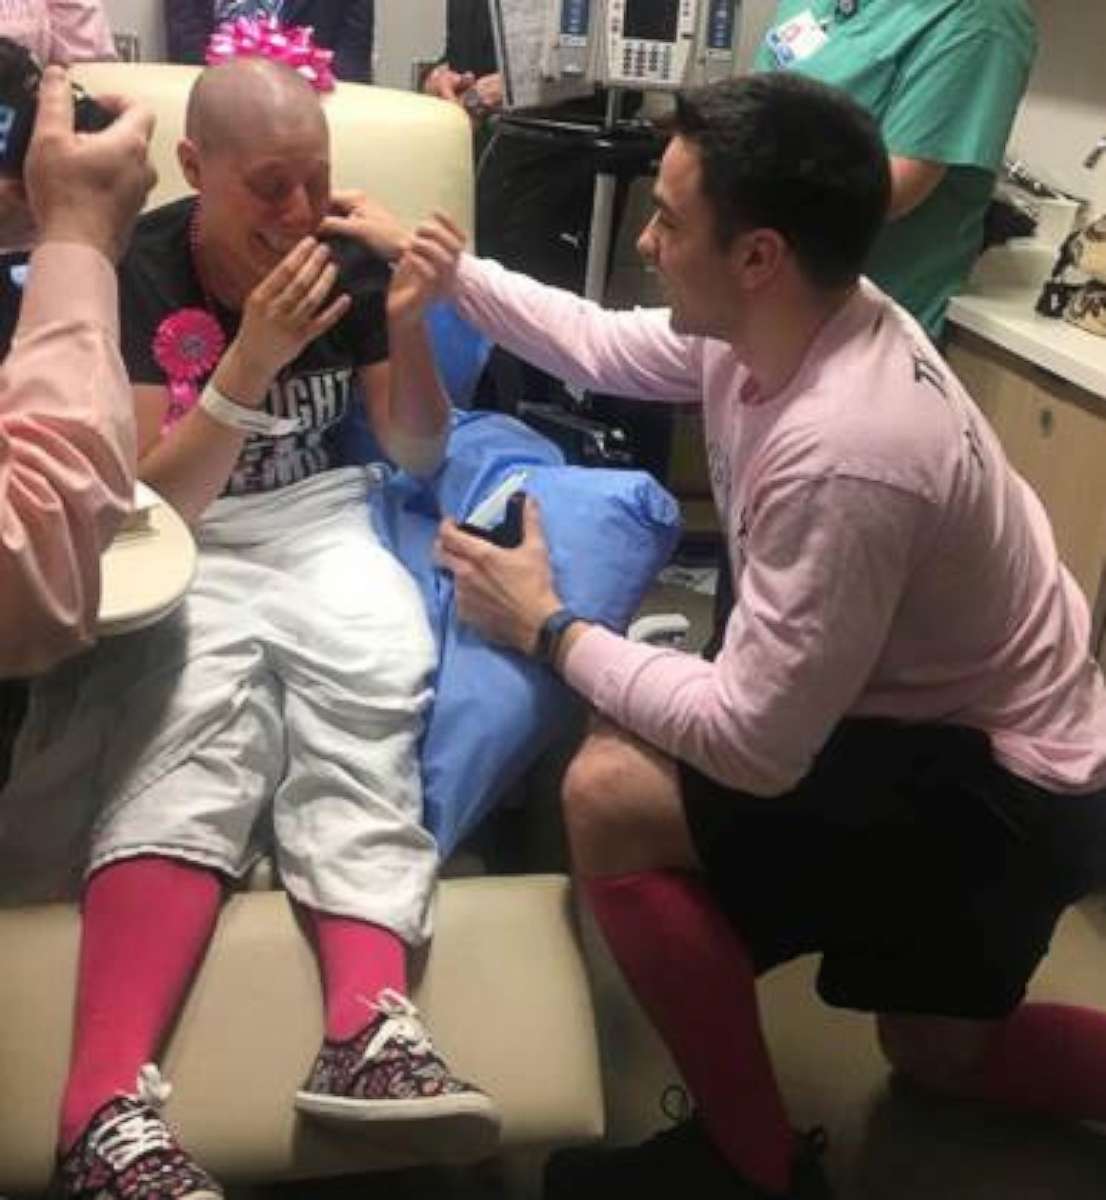 PHOTO: Max Allegretti proposed to Jillian Hanson on February 28, 2018, after her last session of chemotherapy at Memorial Sloan Kettering Monmouth in Middletown, New Jersey.